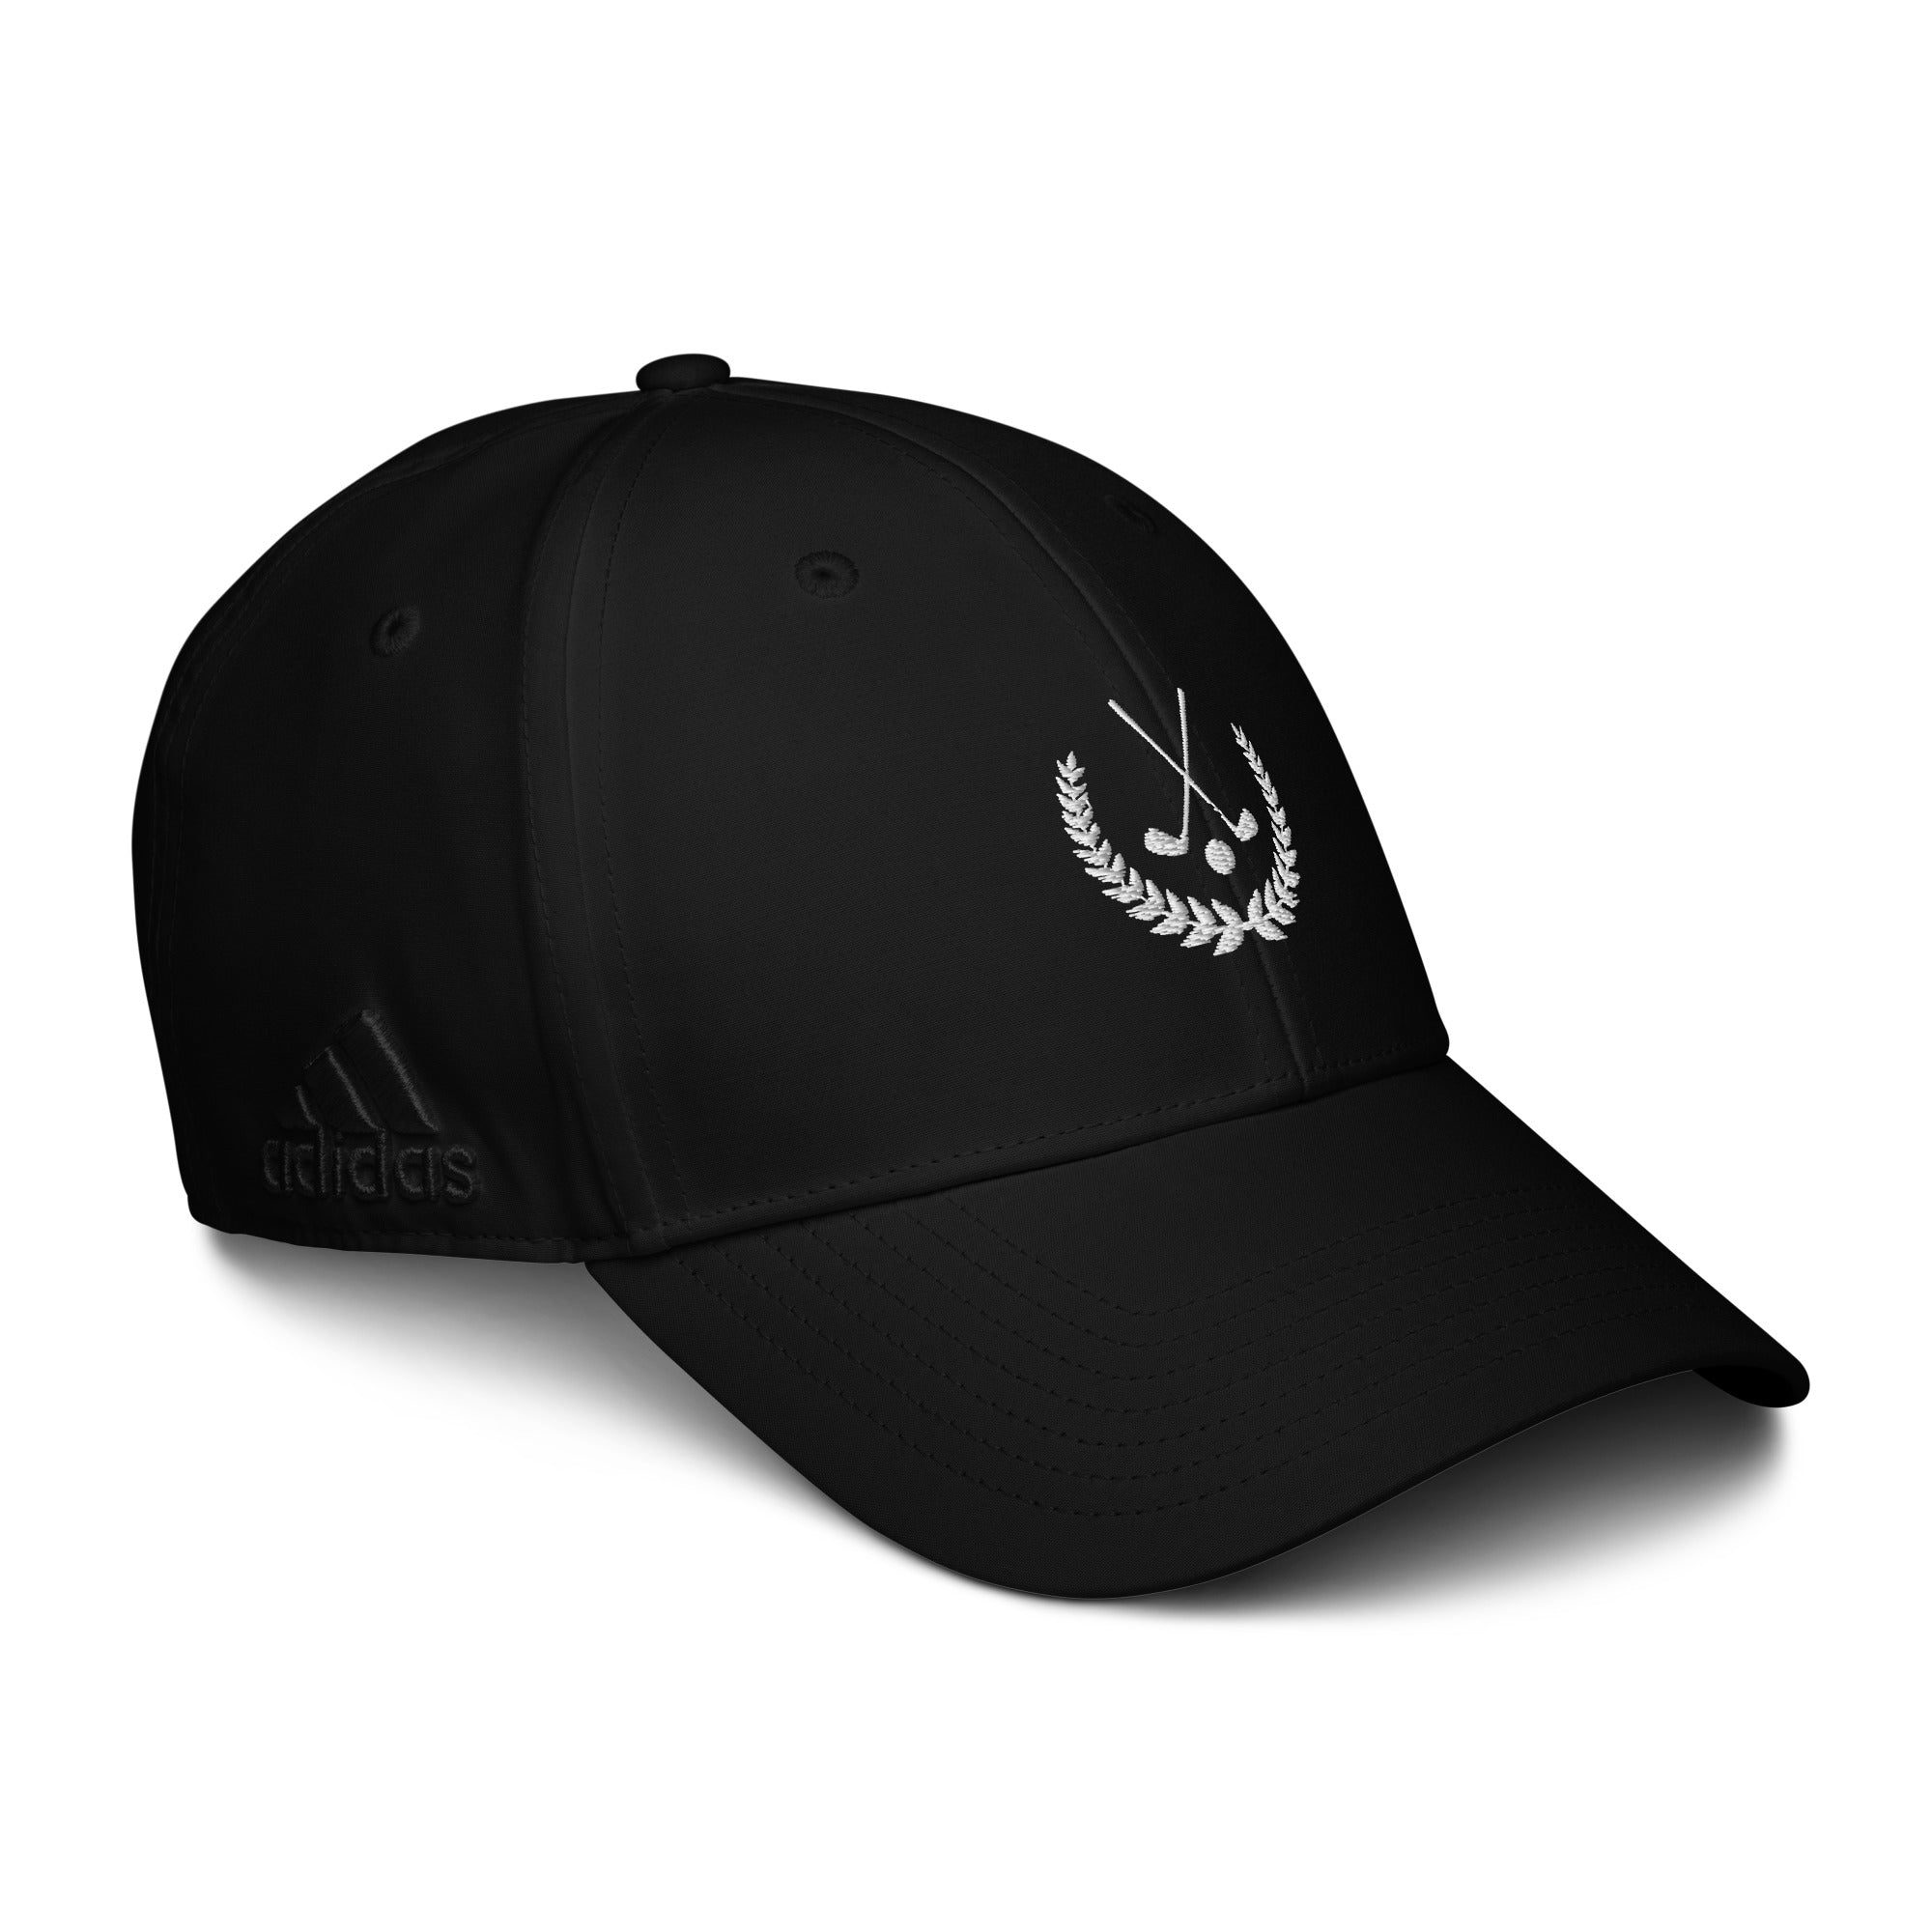 adidas-dad-hat-black-right-front-65b7975d9a67e.jpg